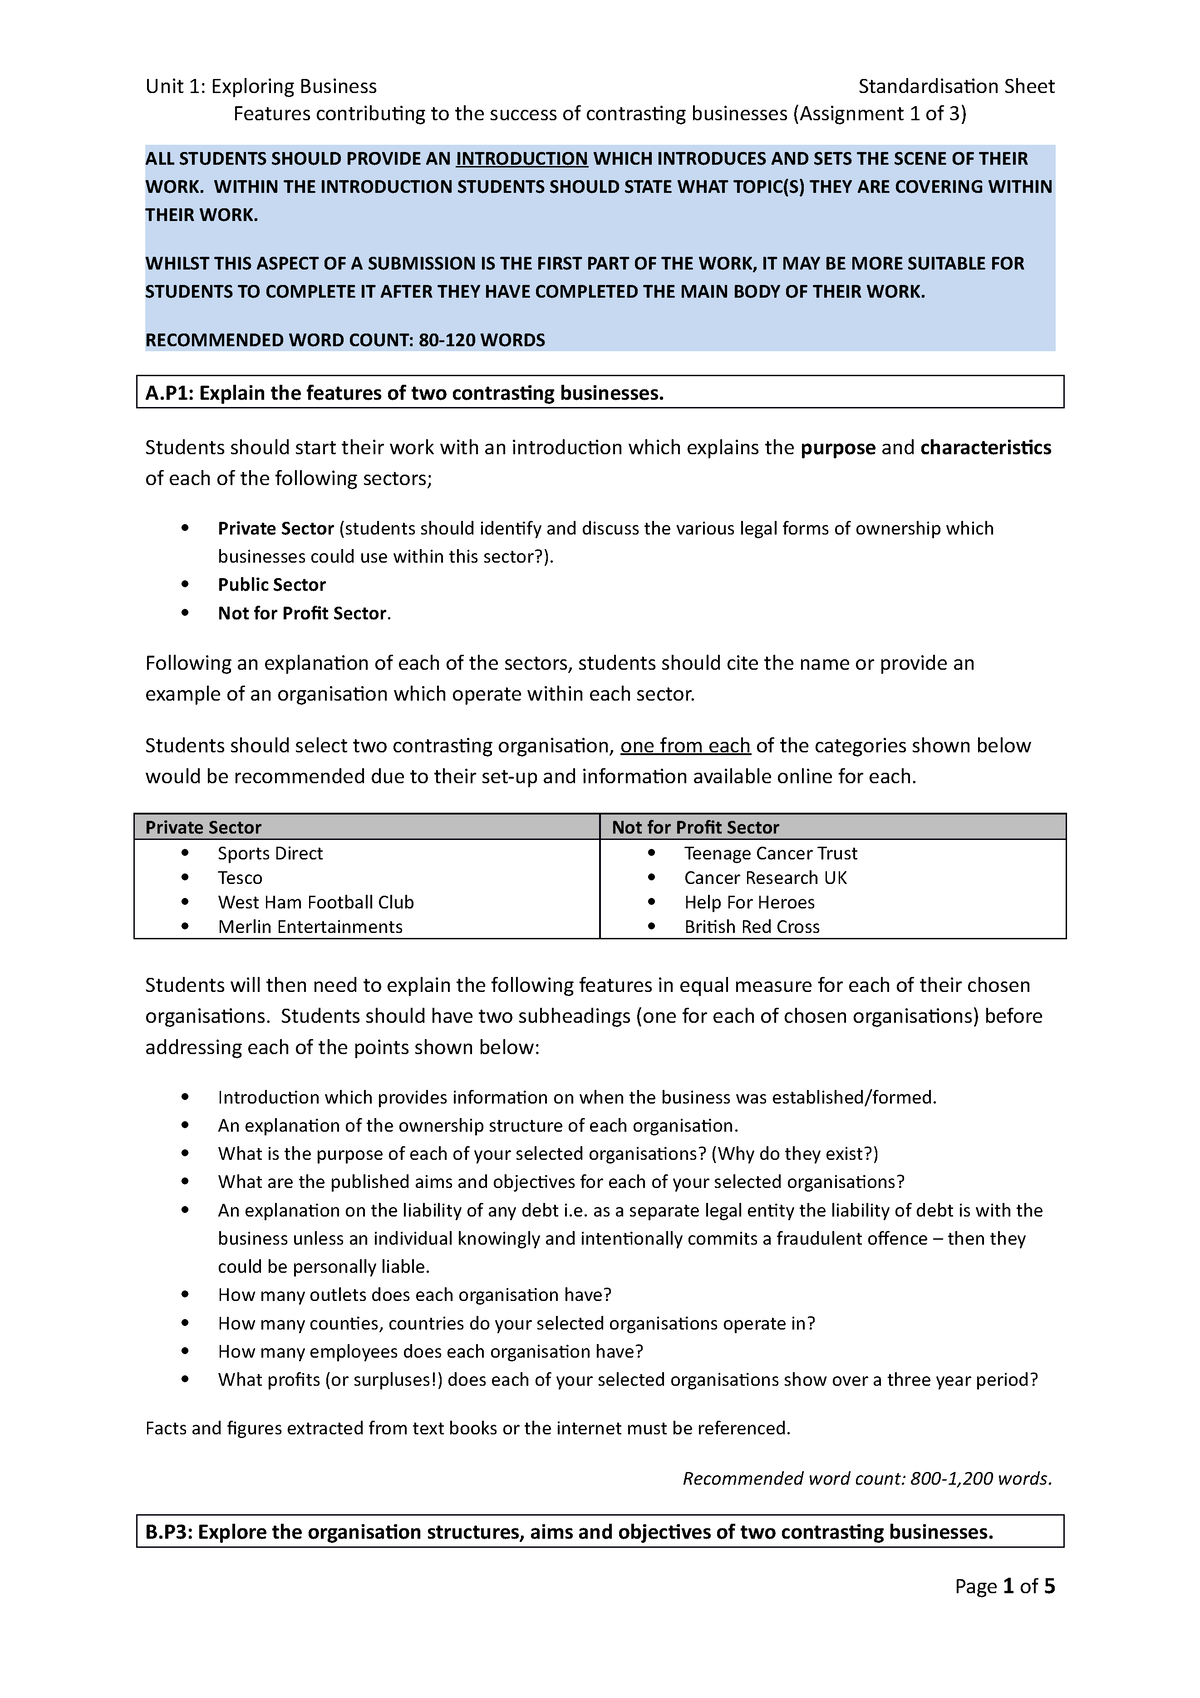 U1 A1 of 3 Standardisation Sheet - Features contributing to the success ...